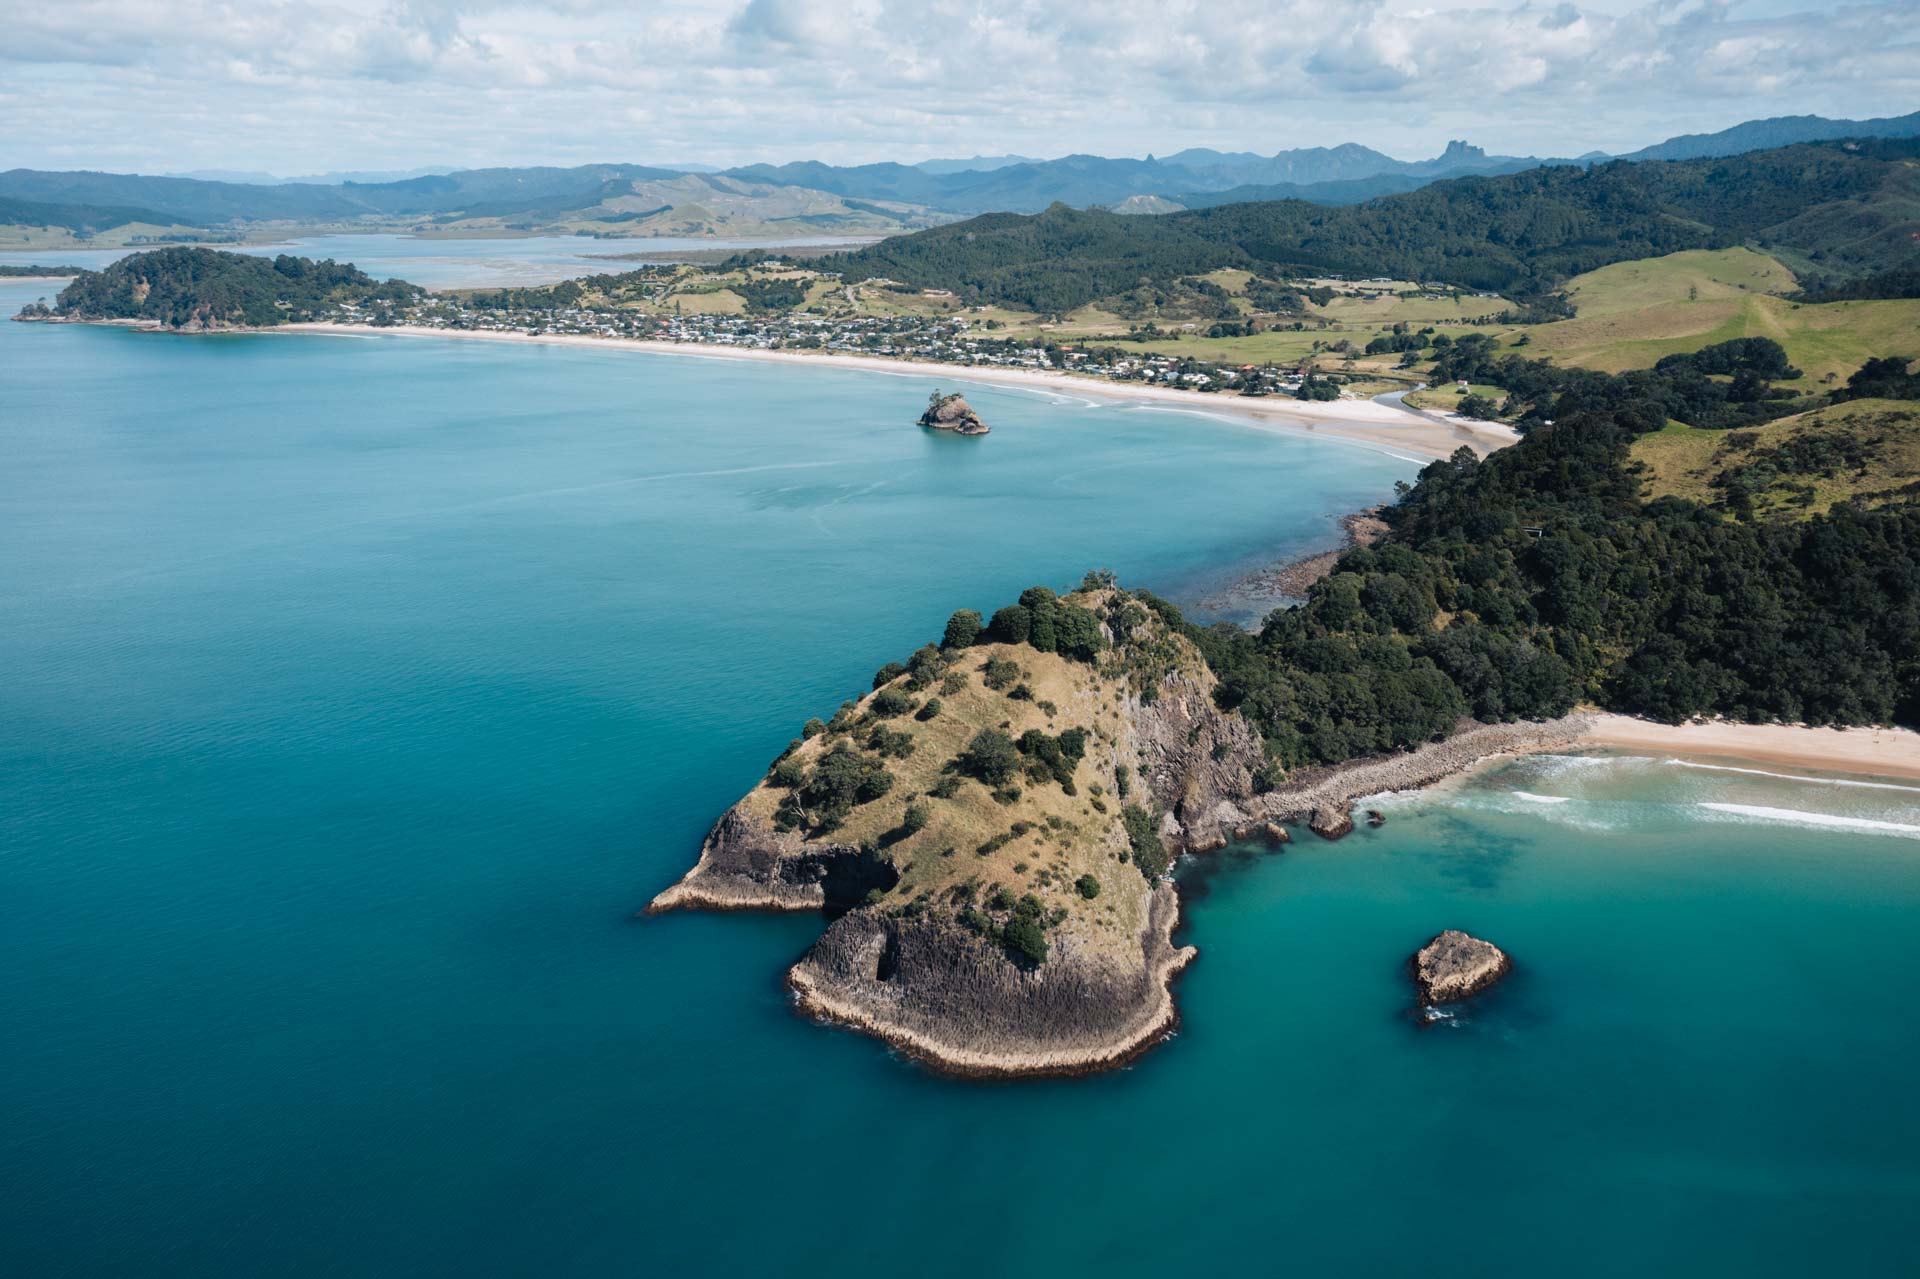 new zealand north island itinerary, new zealand itinerary, North island road trip, north island itinerary, north island itinerary new zealand, north island new zealand itinerary, north island new zealand road trip, things to do in coromandel